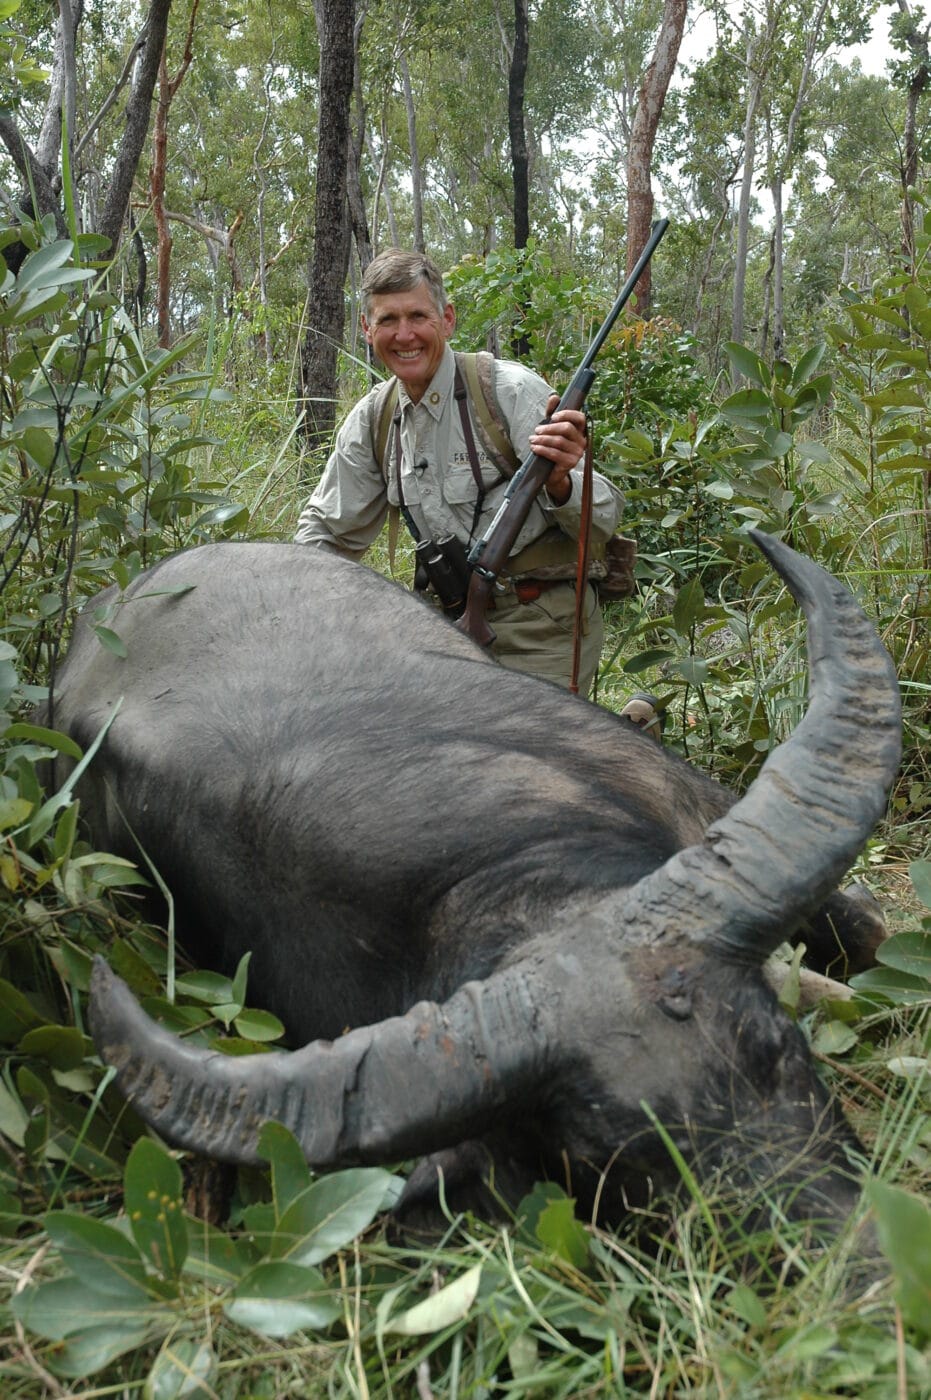 Man posing with Australian buffalo shot at 27 yards with a .338 Magnum Federal load with a Trophy Bonded bullet